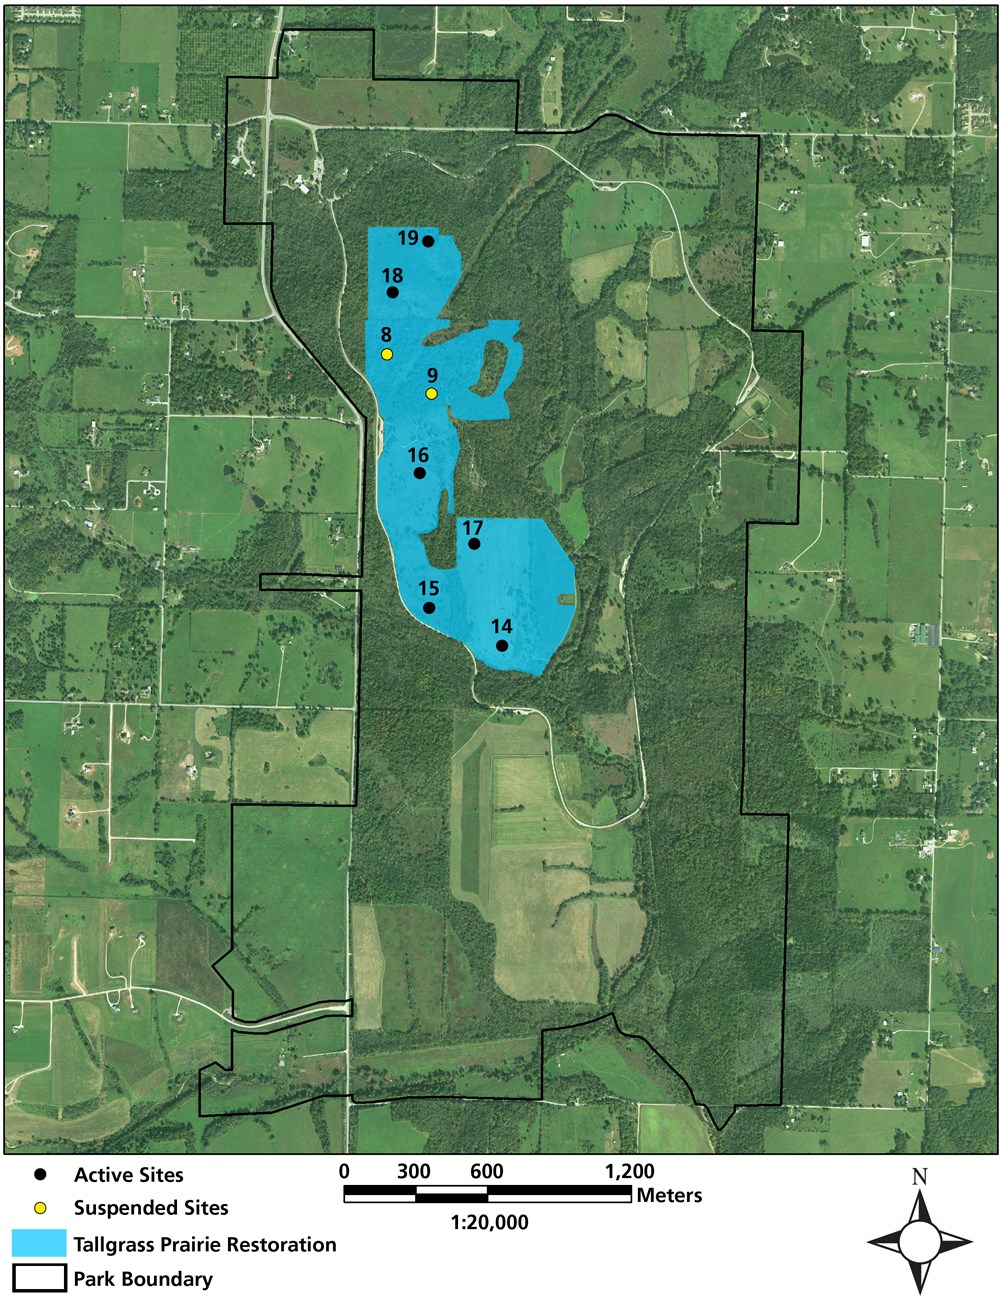 A map of Wilson's Creek National Battlefield showing the tallgrass prairie restoration area and six monitoring sites numbered 15, 16, 17, 18, and 19 and two suspended monitoring sites numbered 8 and 9.